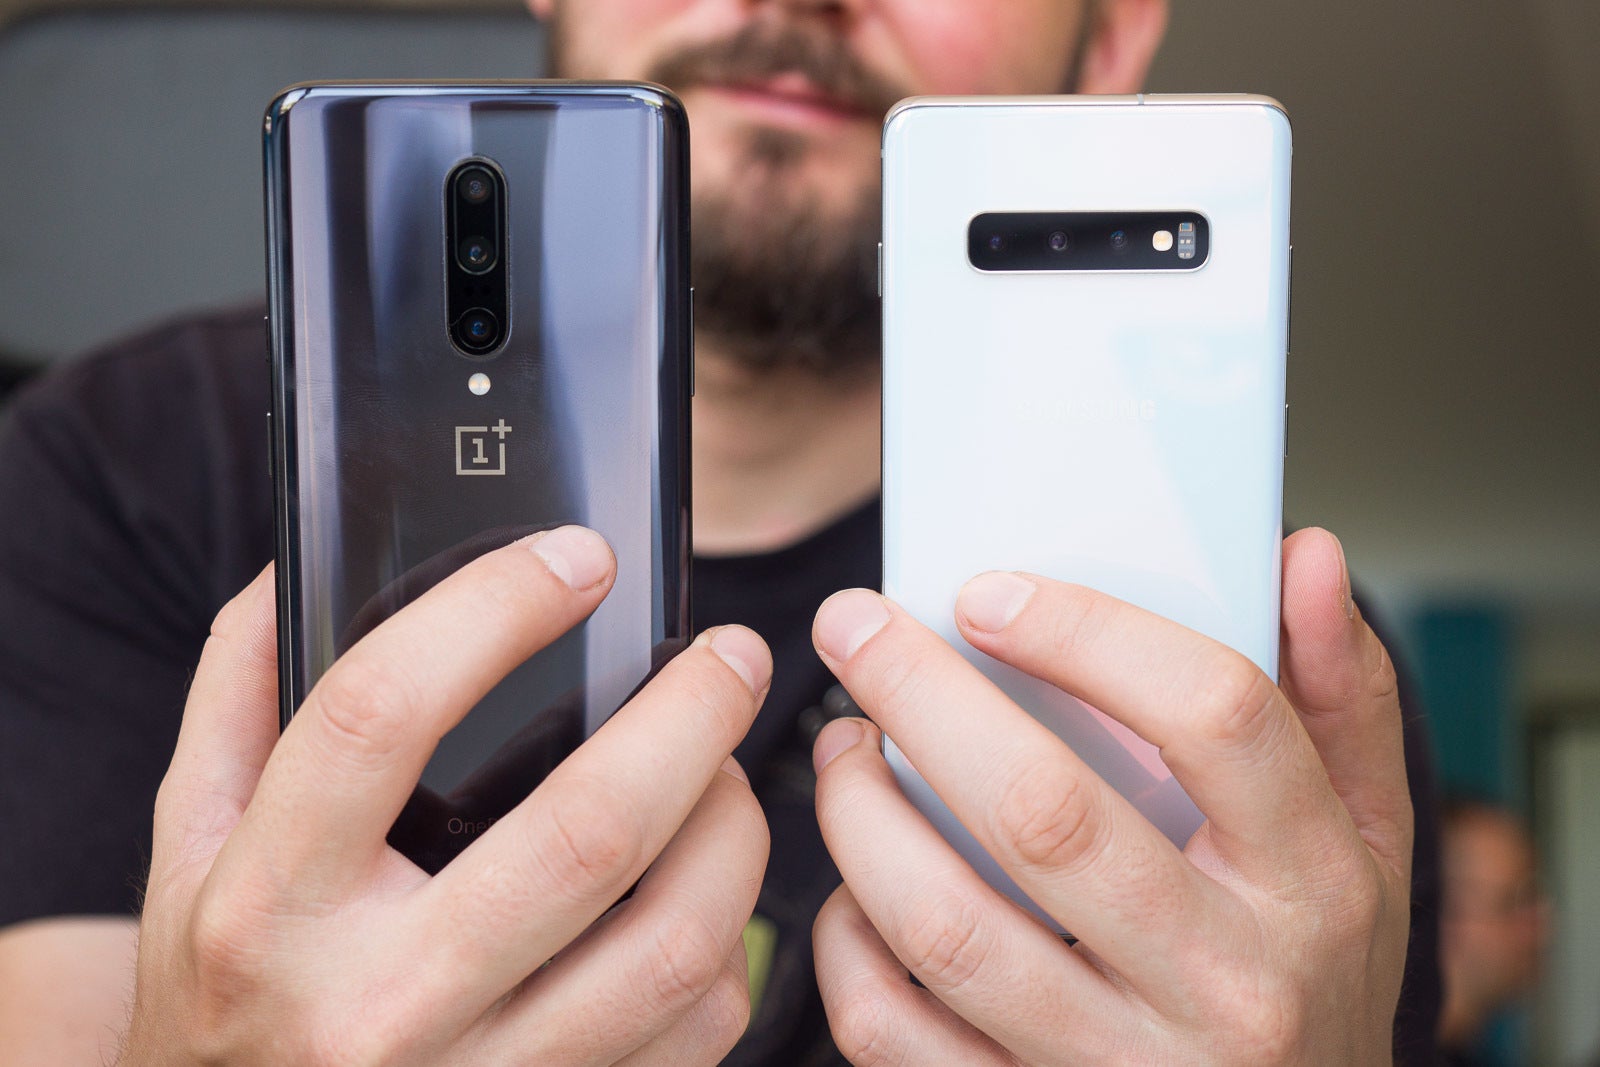 Samsung Galaxy S10+ wins Readers' Favorite Phone of H1 2019 award: here are the full rankings